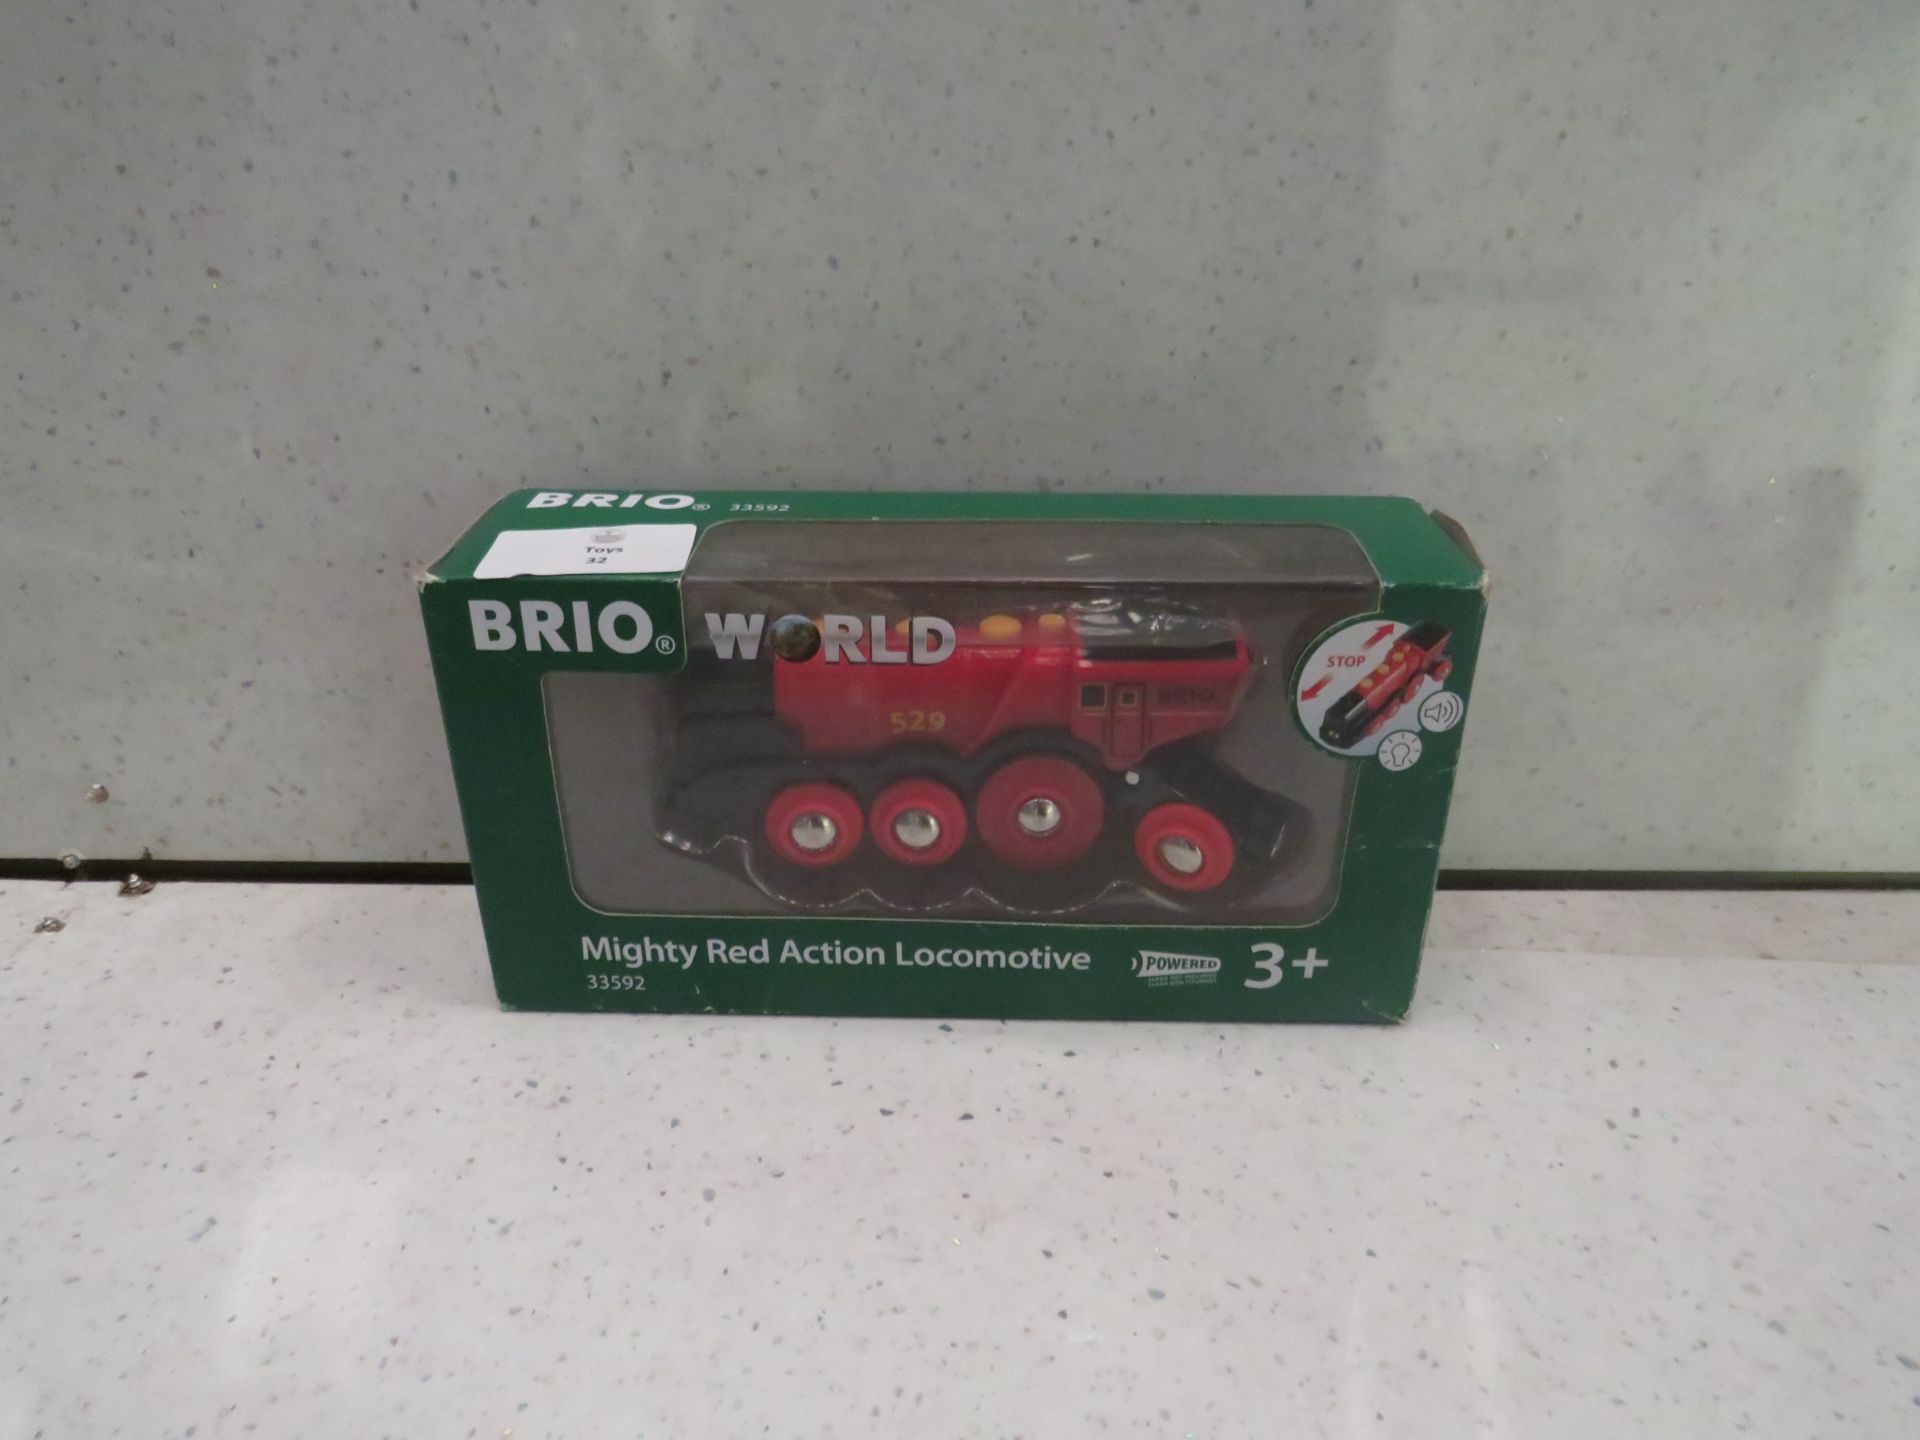 Brio world - Mightly red action locomotive - Unchecked & Boxed.